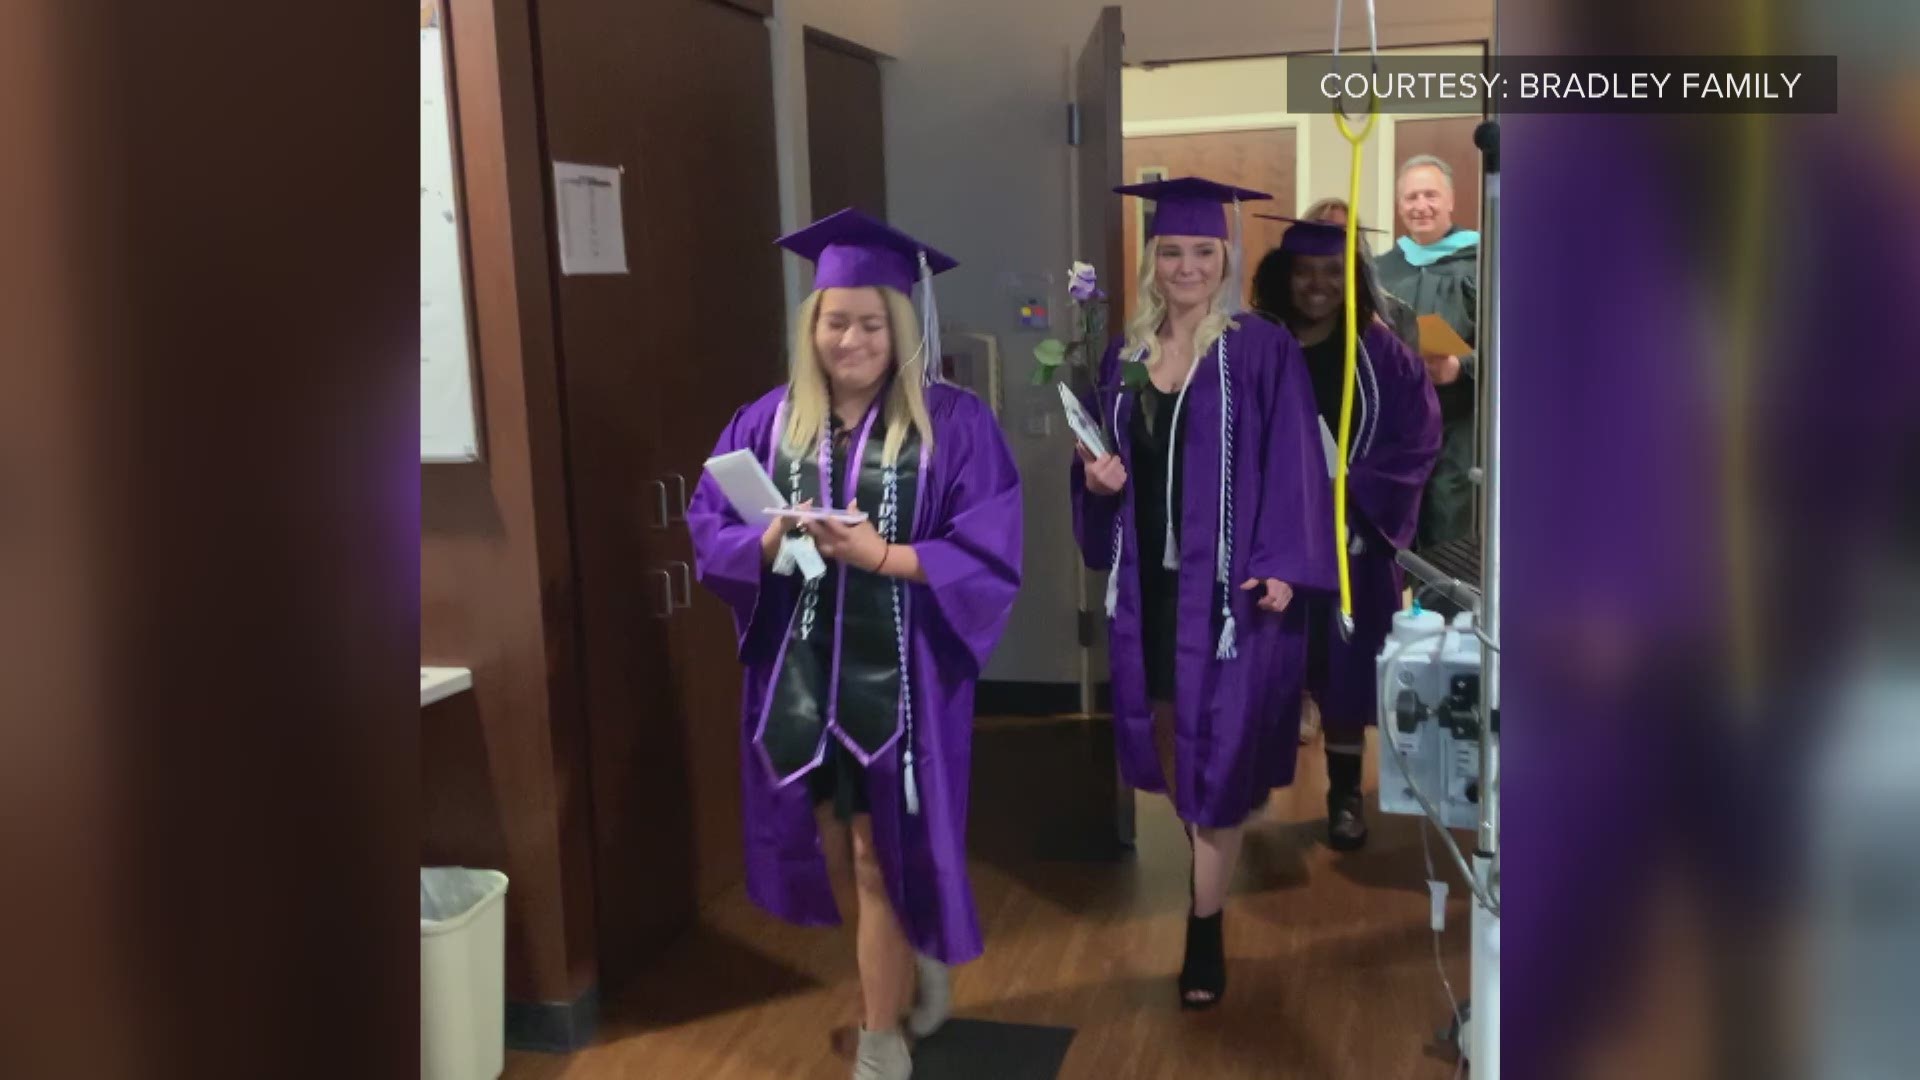 When Grace Bradley had to unexpectedly miss her graduation, graduation came to her.